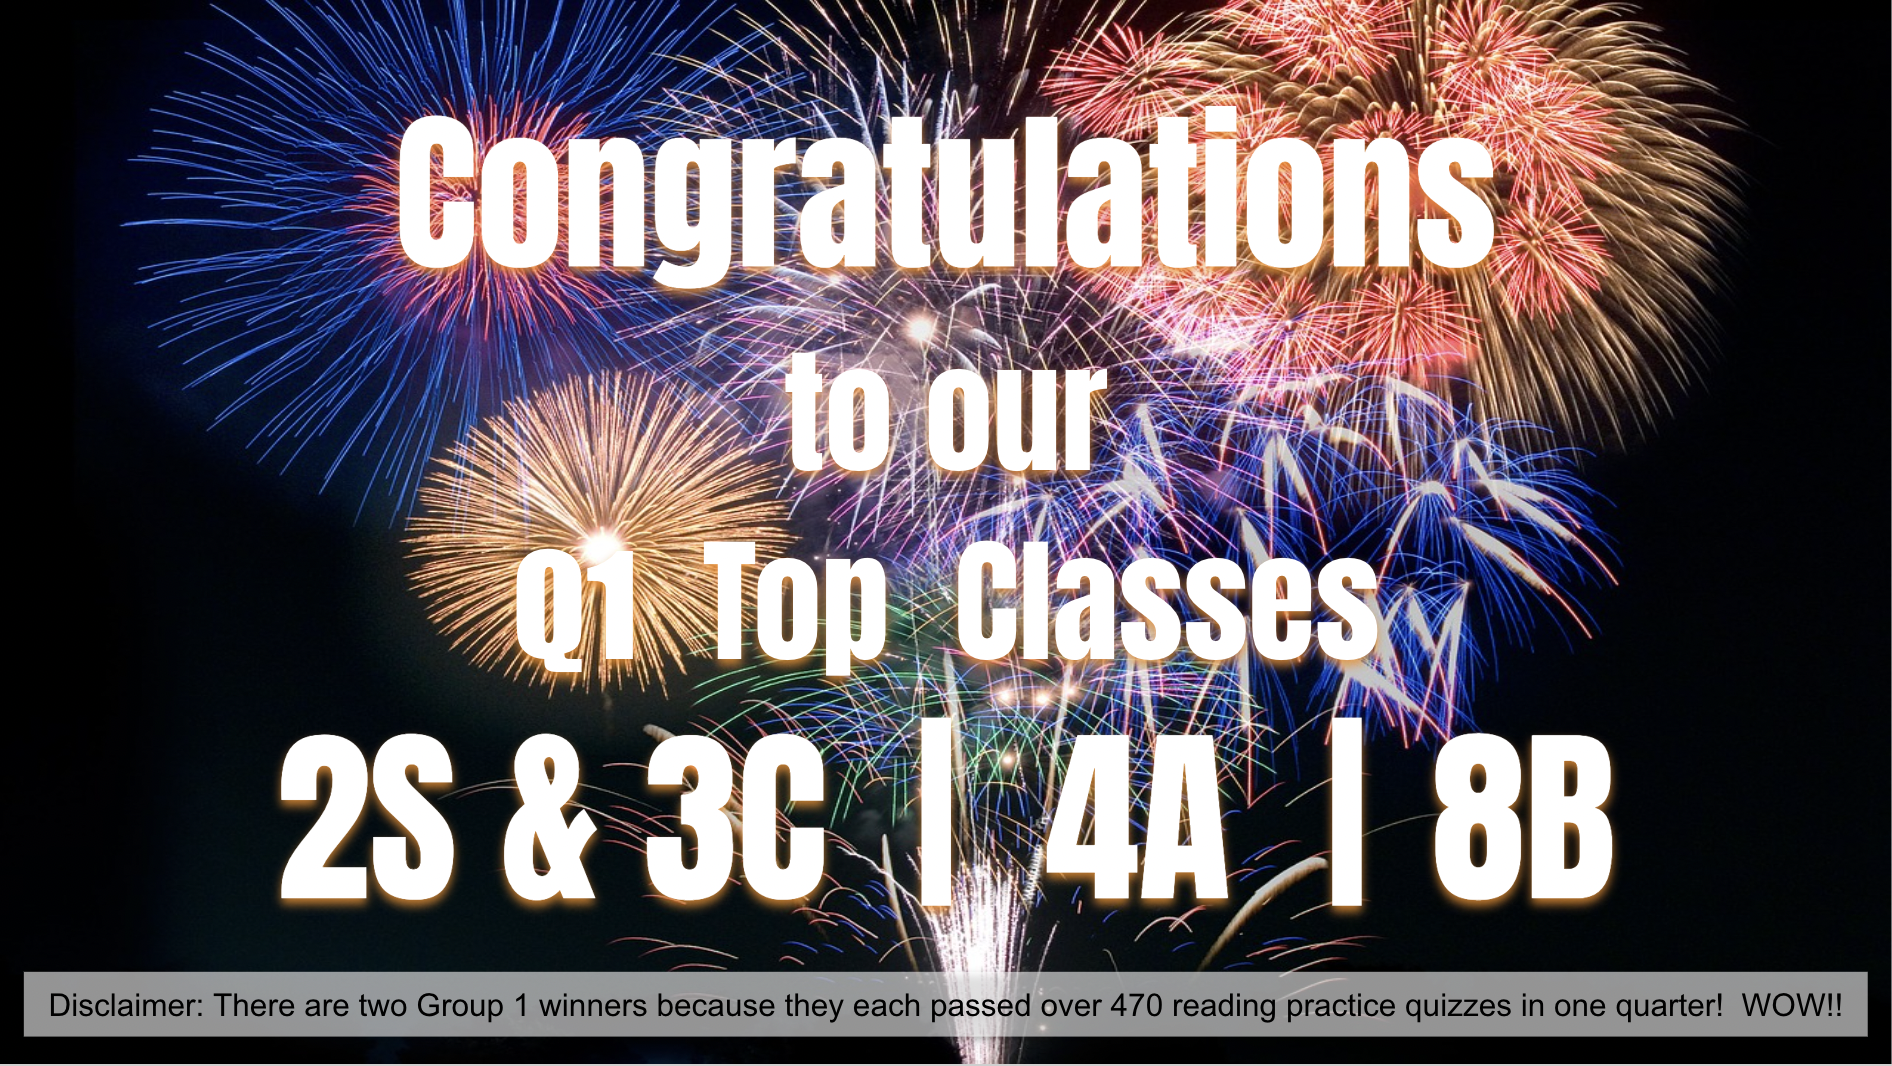 Q1 Top Classes for GCS is READING for the WIN!